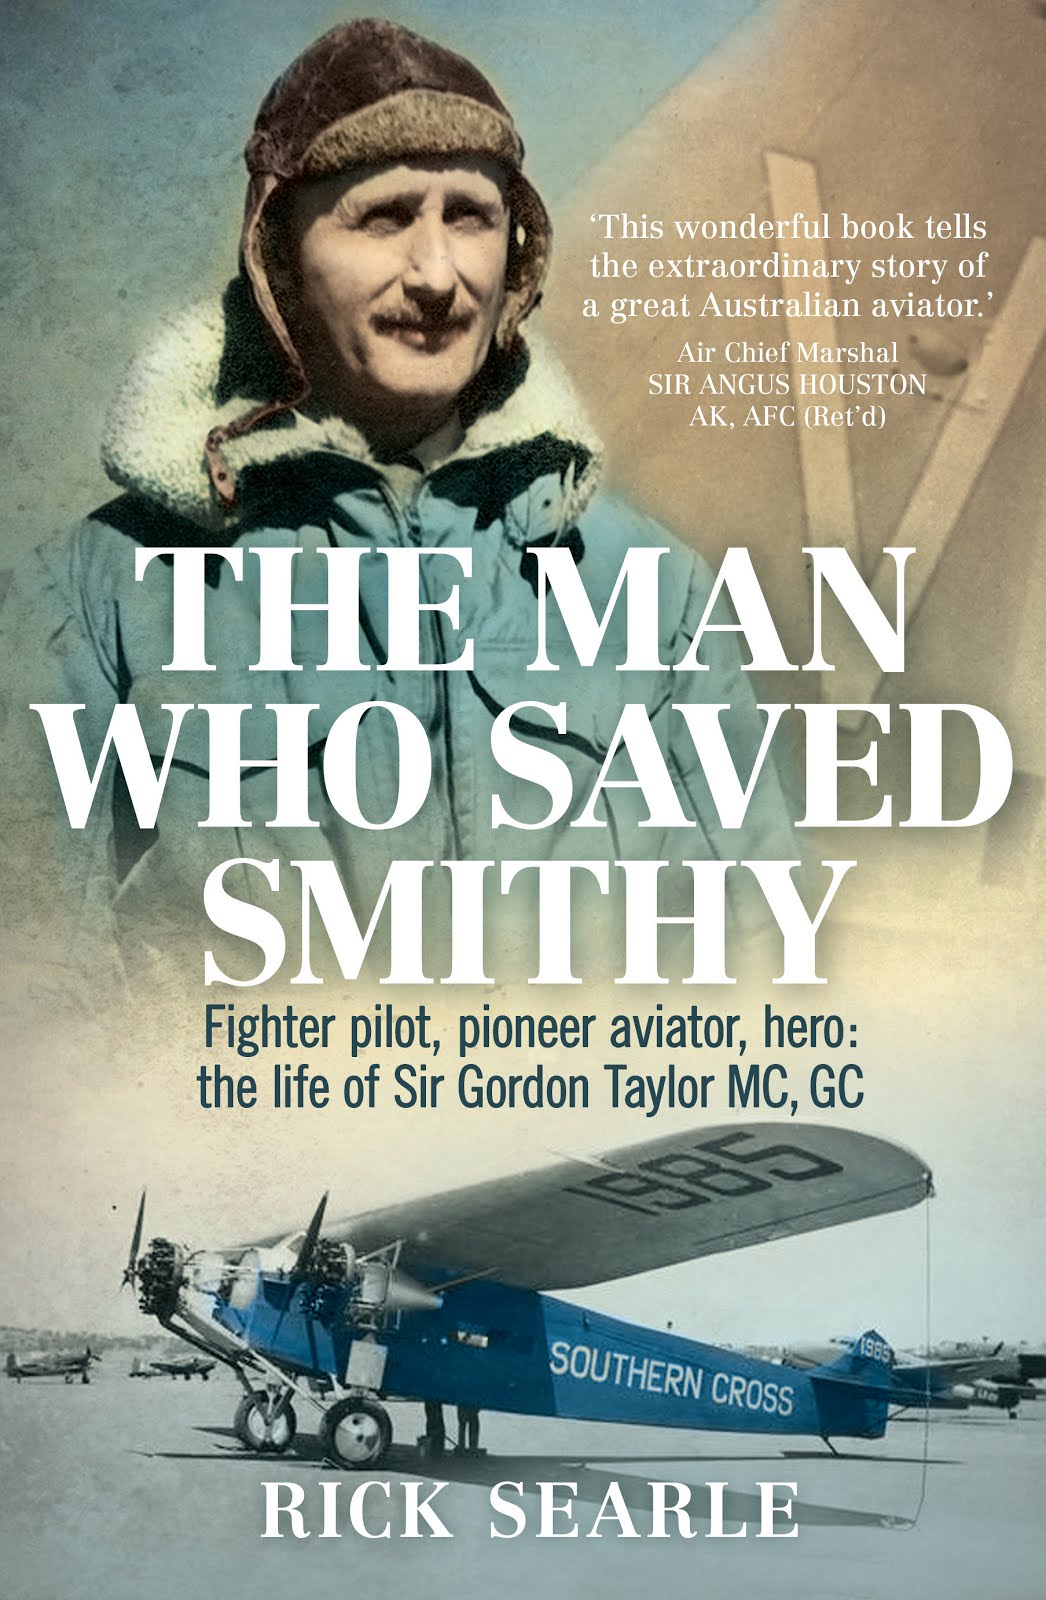 The Man Who Saved Smithy